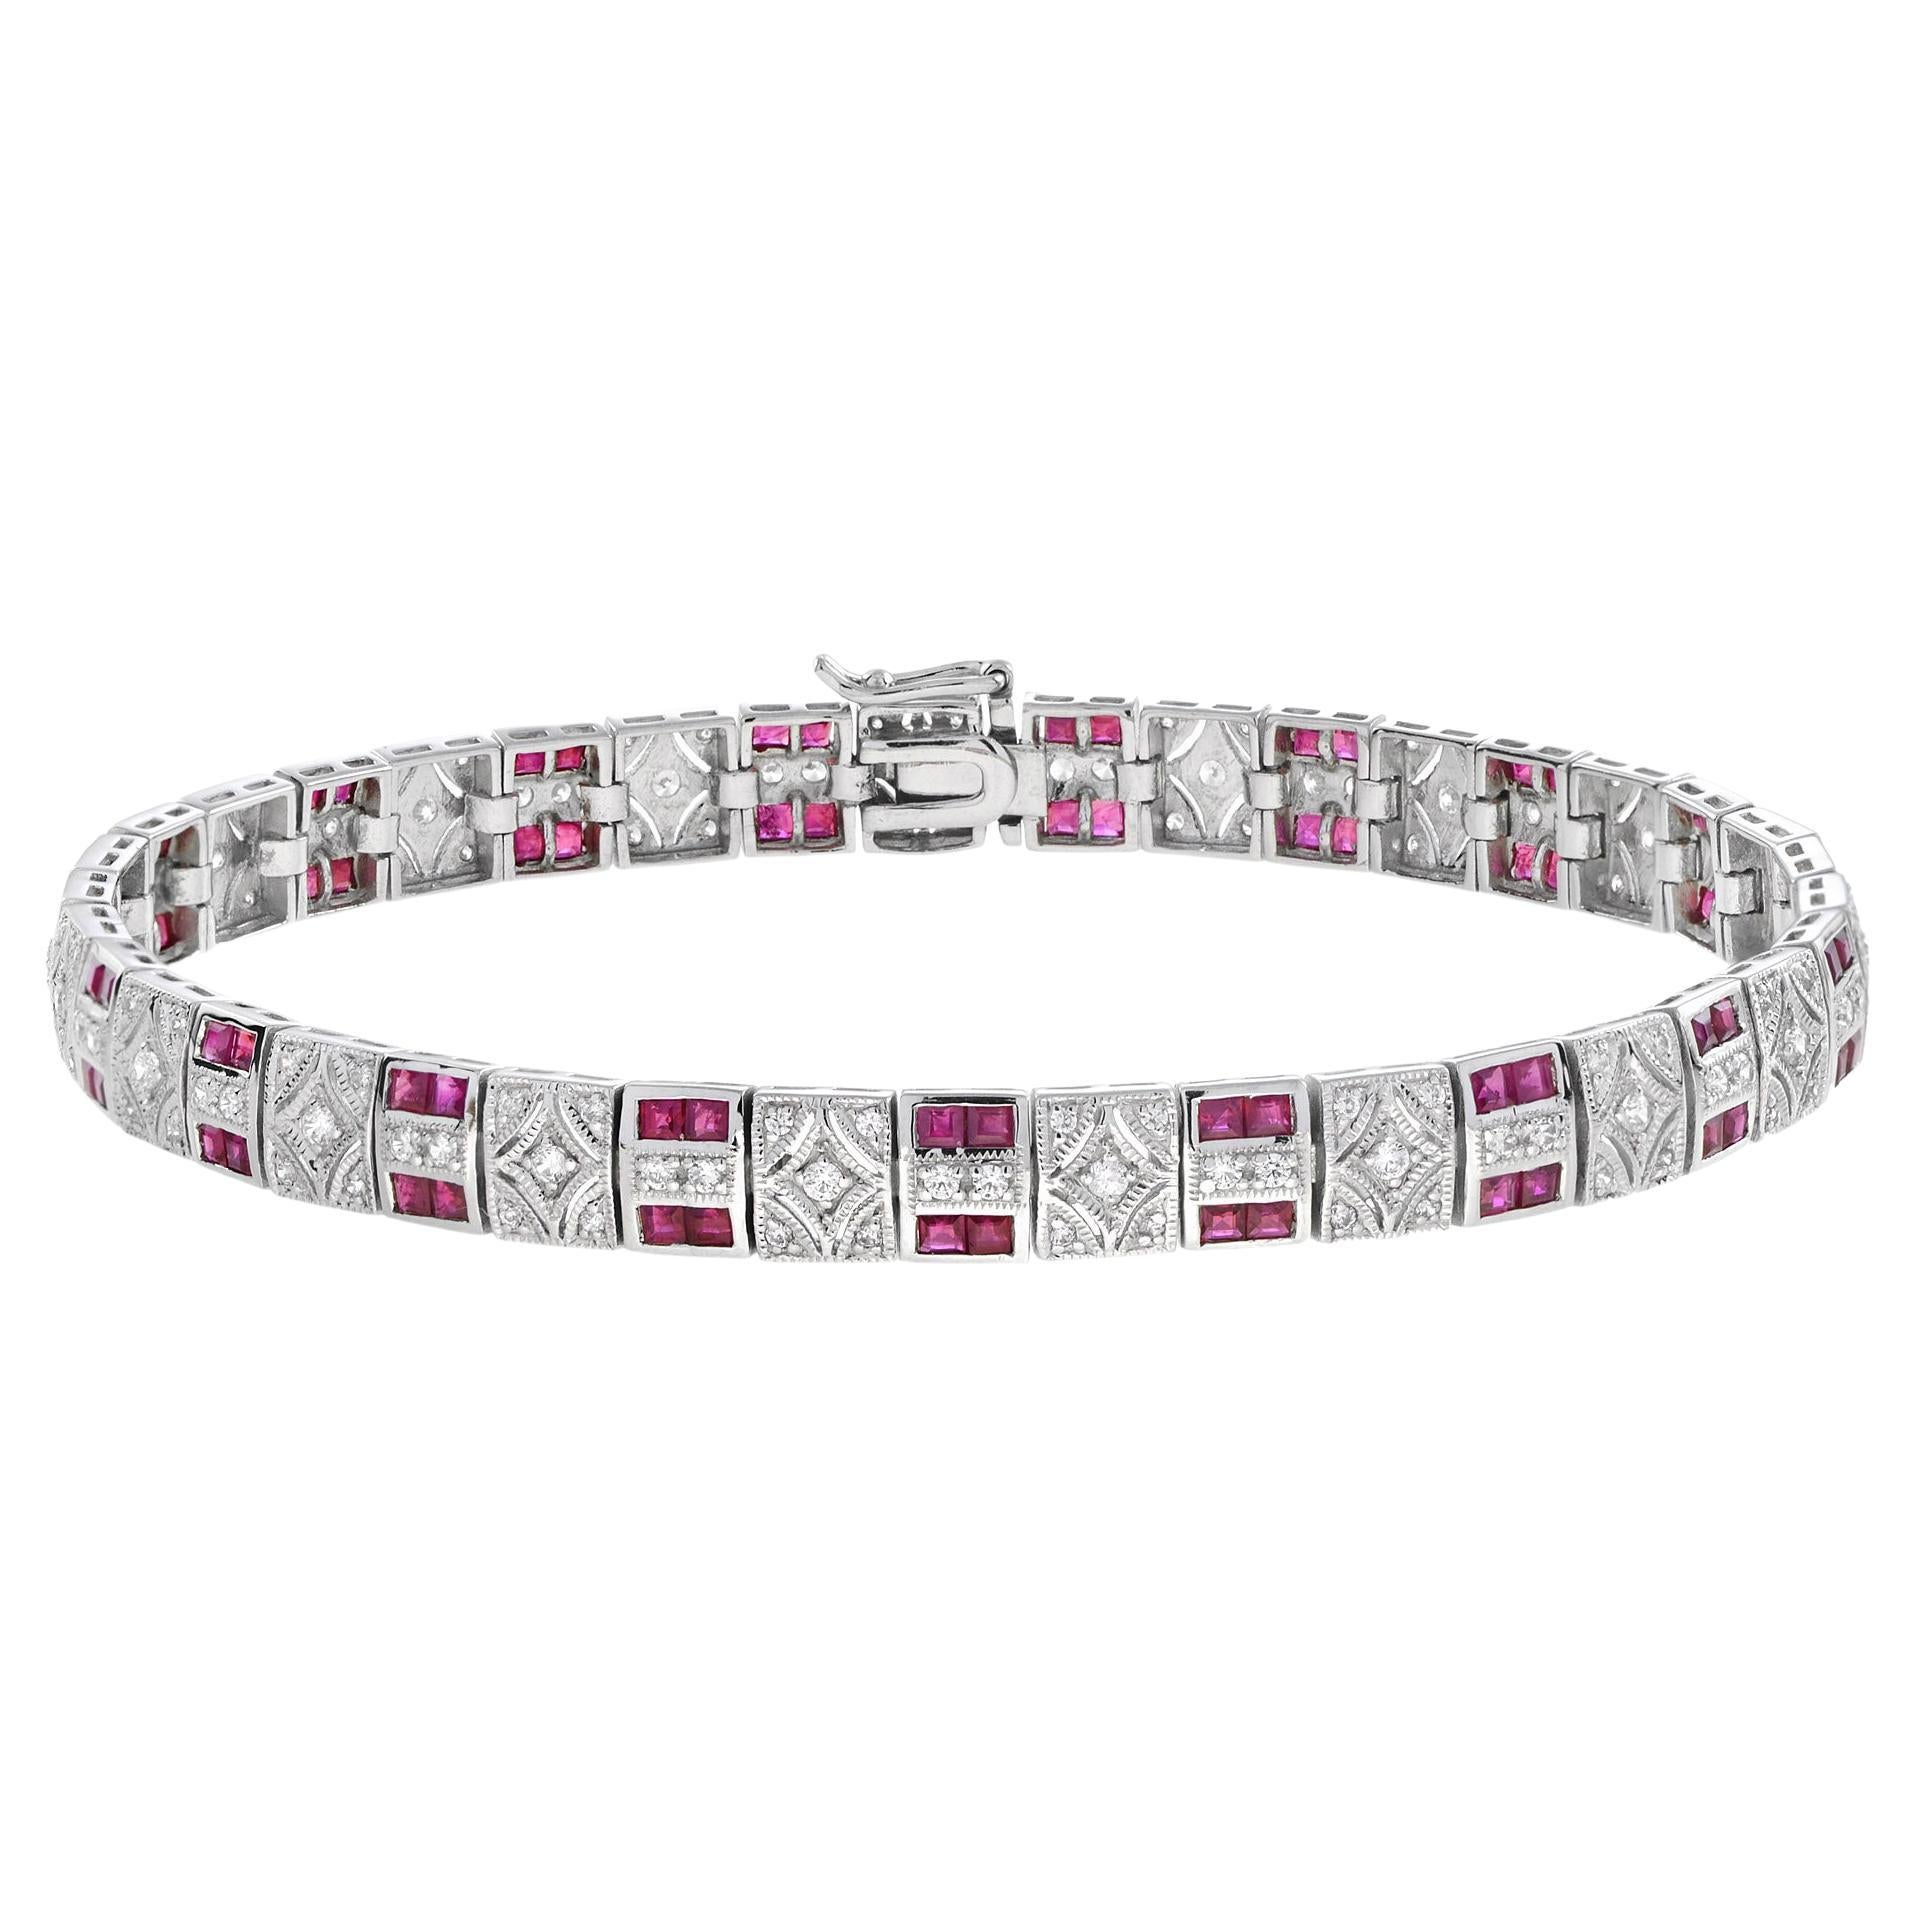 French Cut Ruby and Diamond Art Deco Style Link Bracelet in 18K White Gold